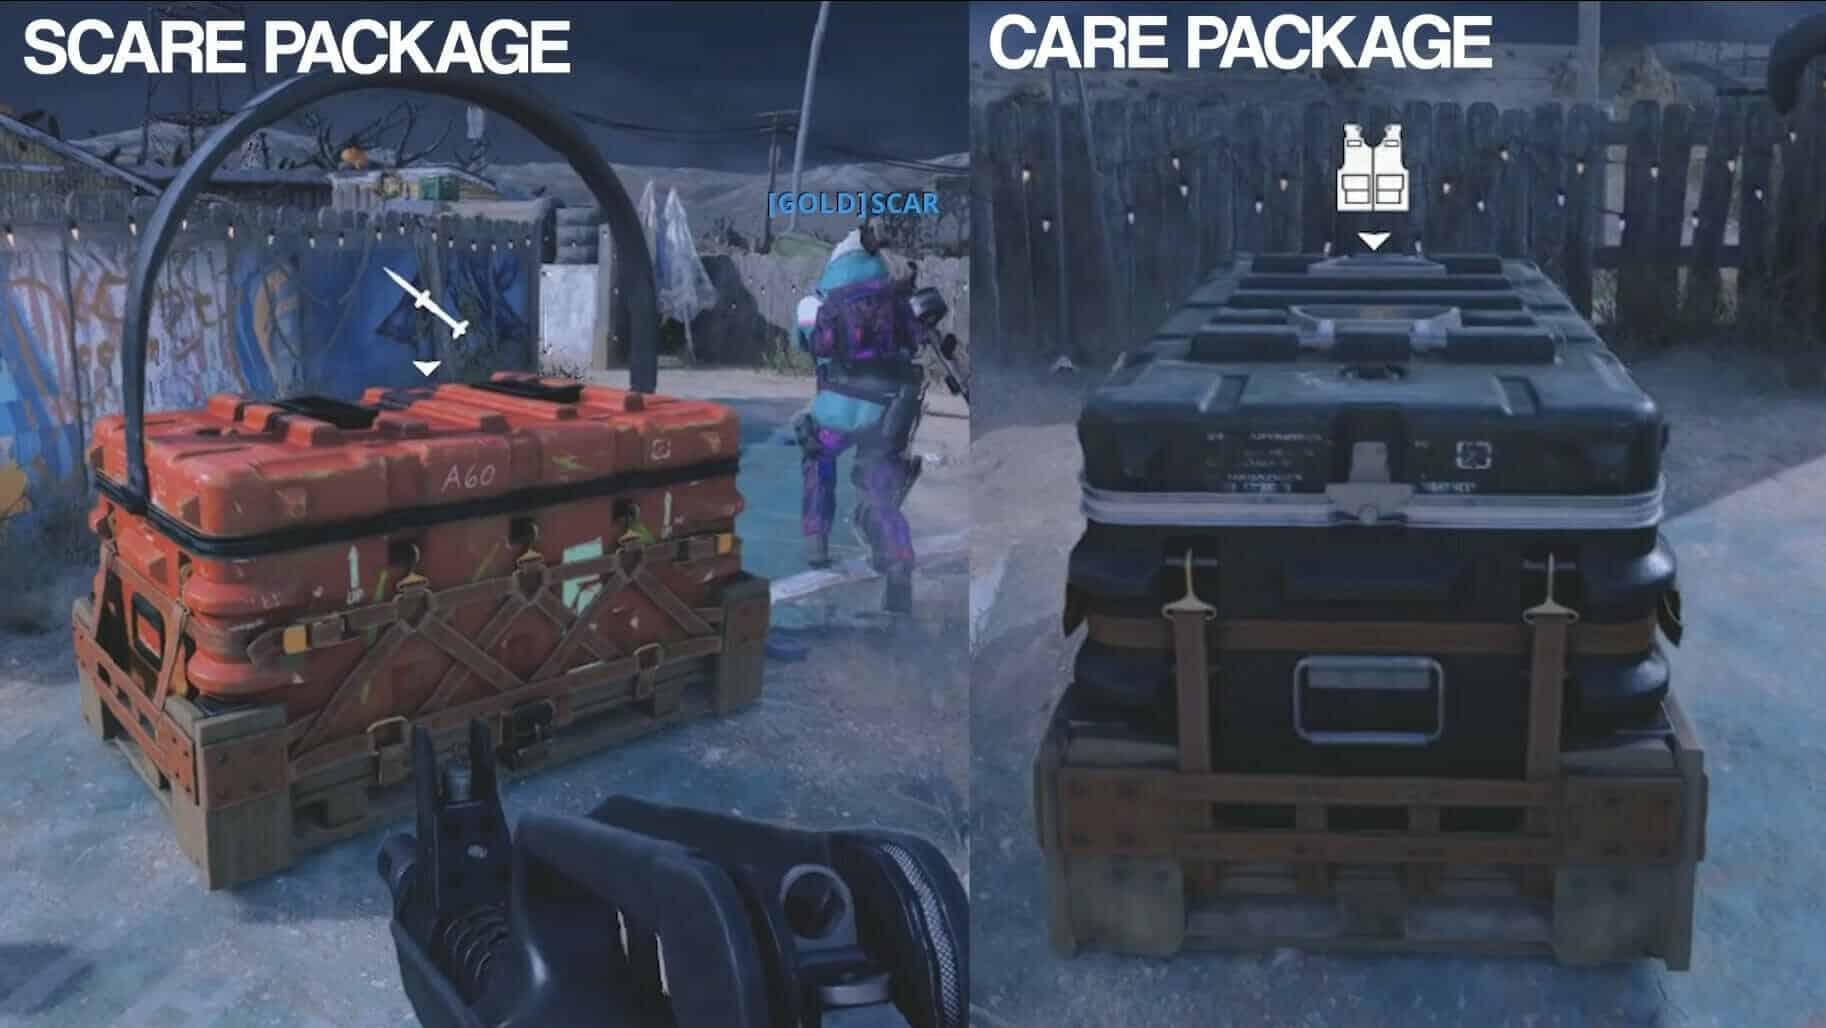 Scare Package and Care Package BOCW comparison